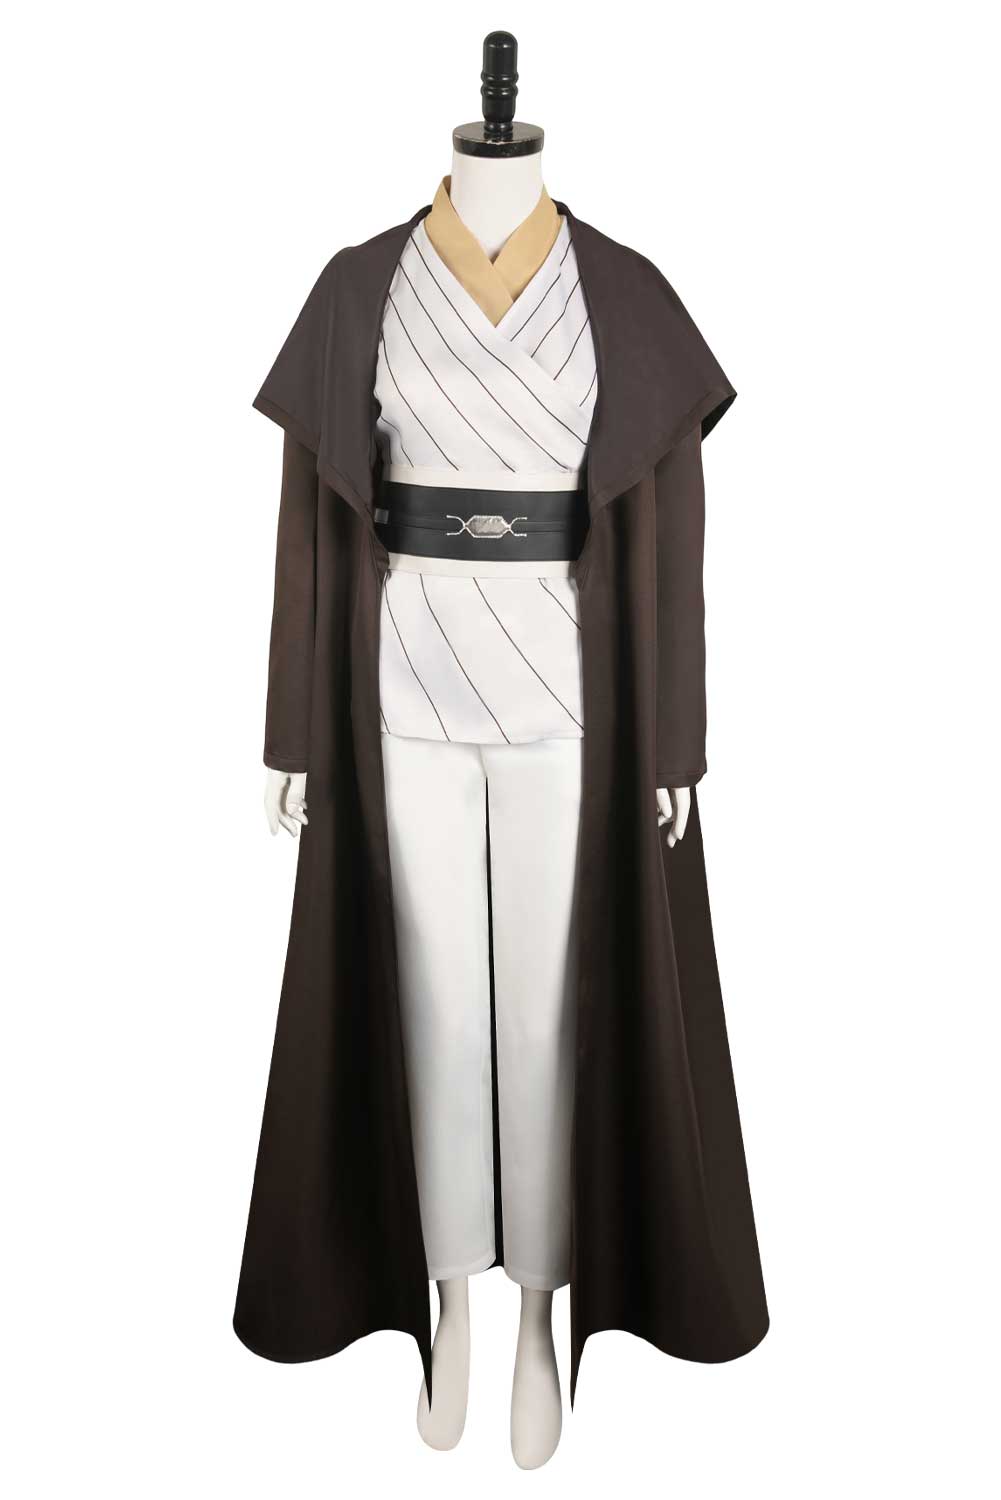 TV 2024 The Acolyte Master Indara White Jedi Set Outfits Halloween Carnival Suit Cosplay Costume